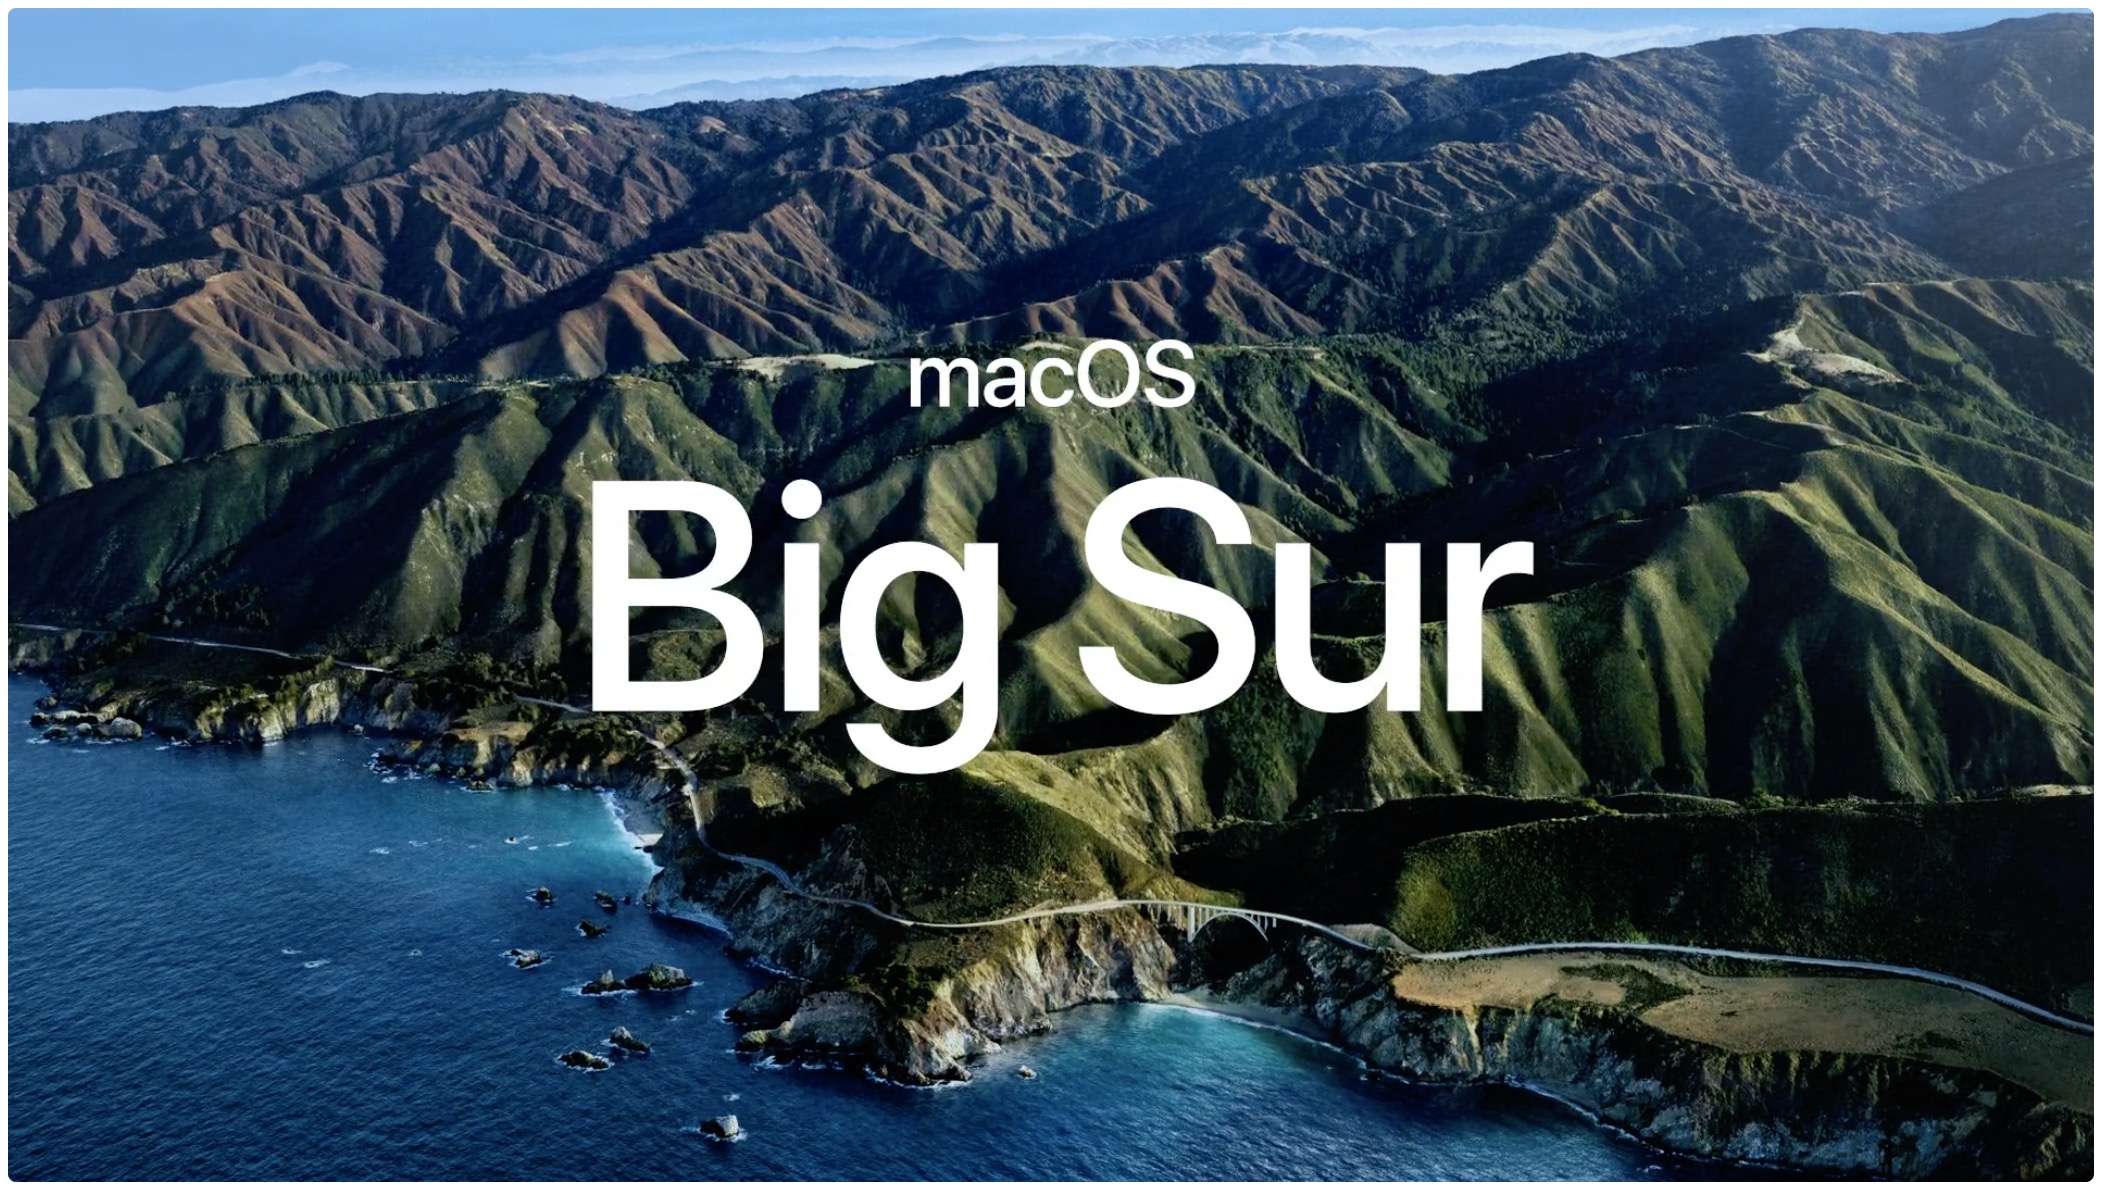 Apple's promotional image for the macOS Big Sur software update for Mac computers